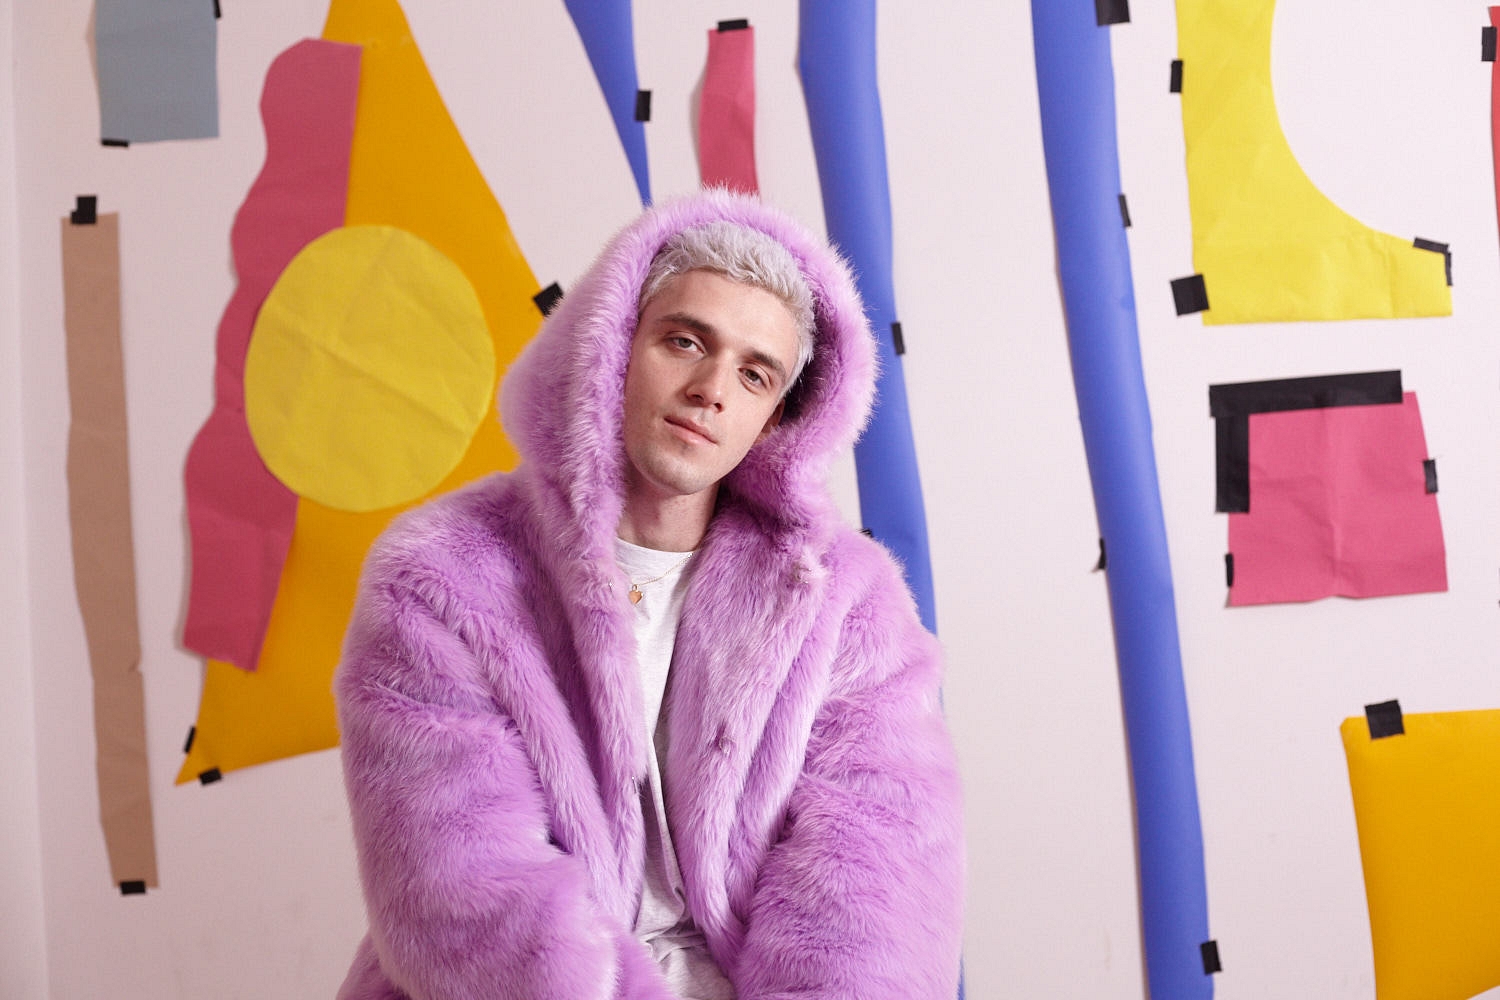 Lauv shares ‘Modern Loneliness’ video